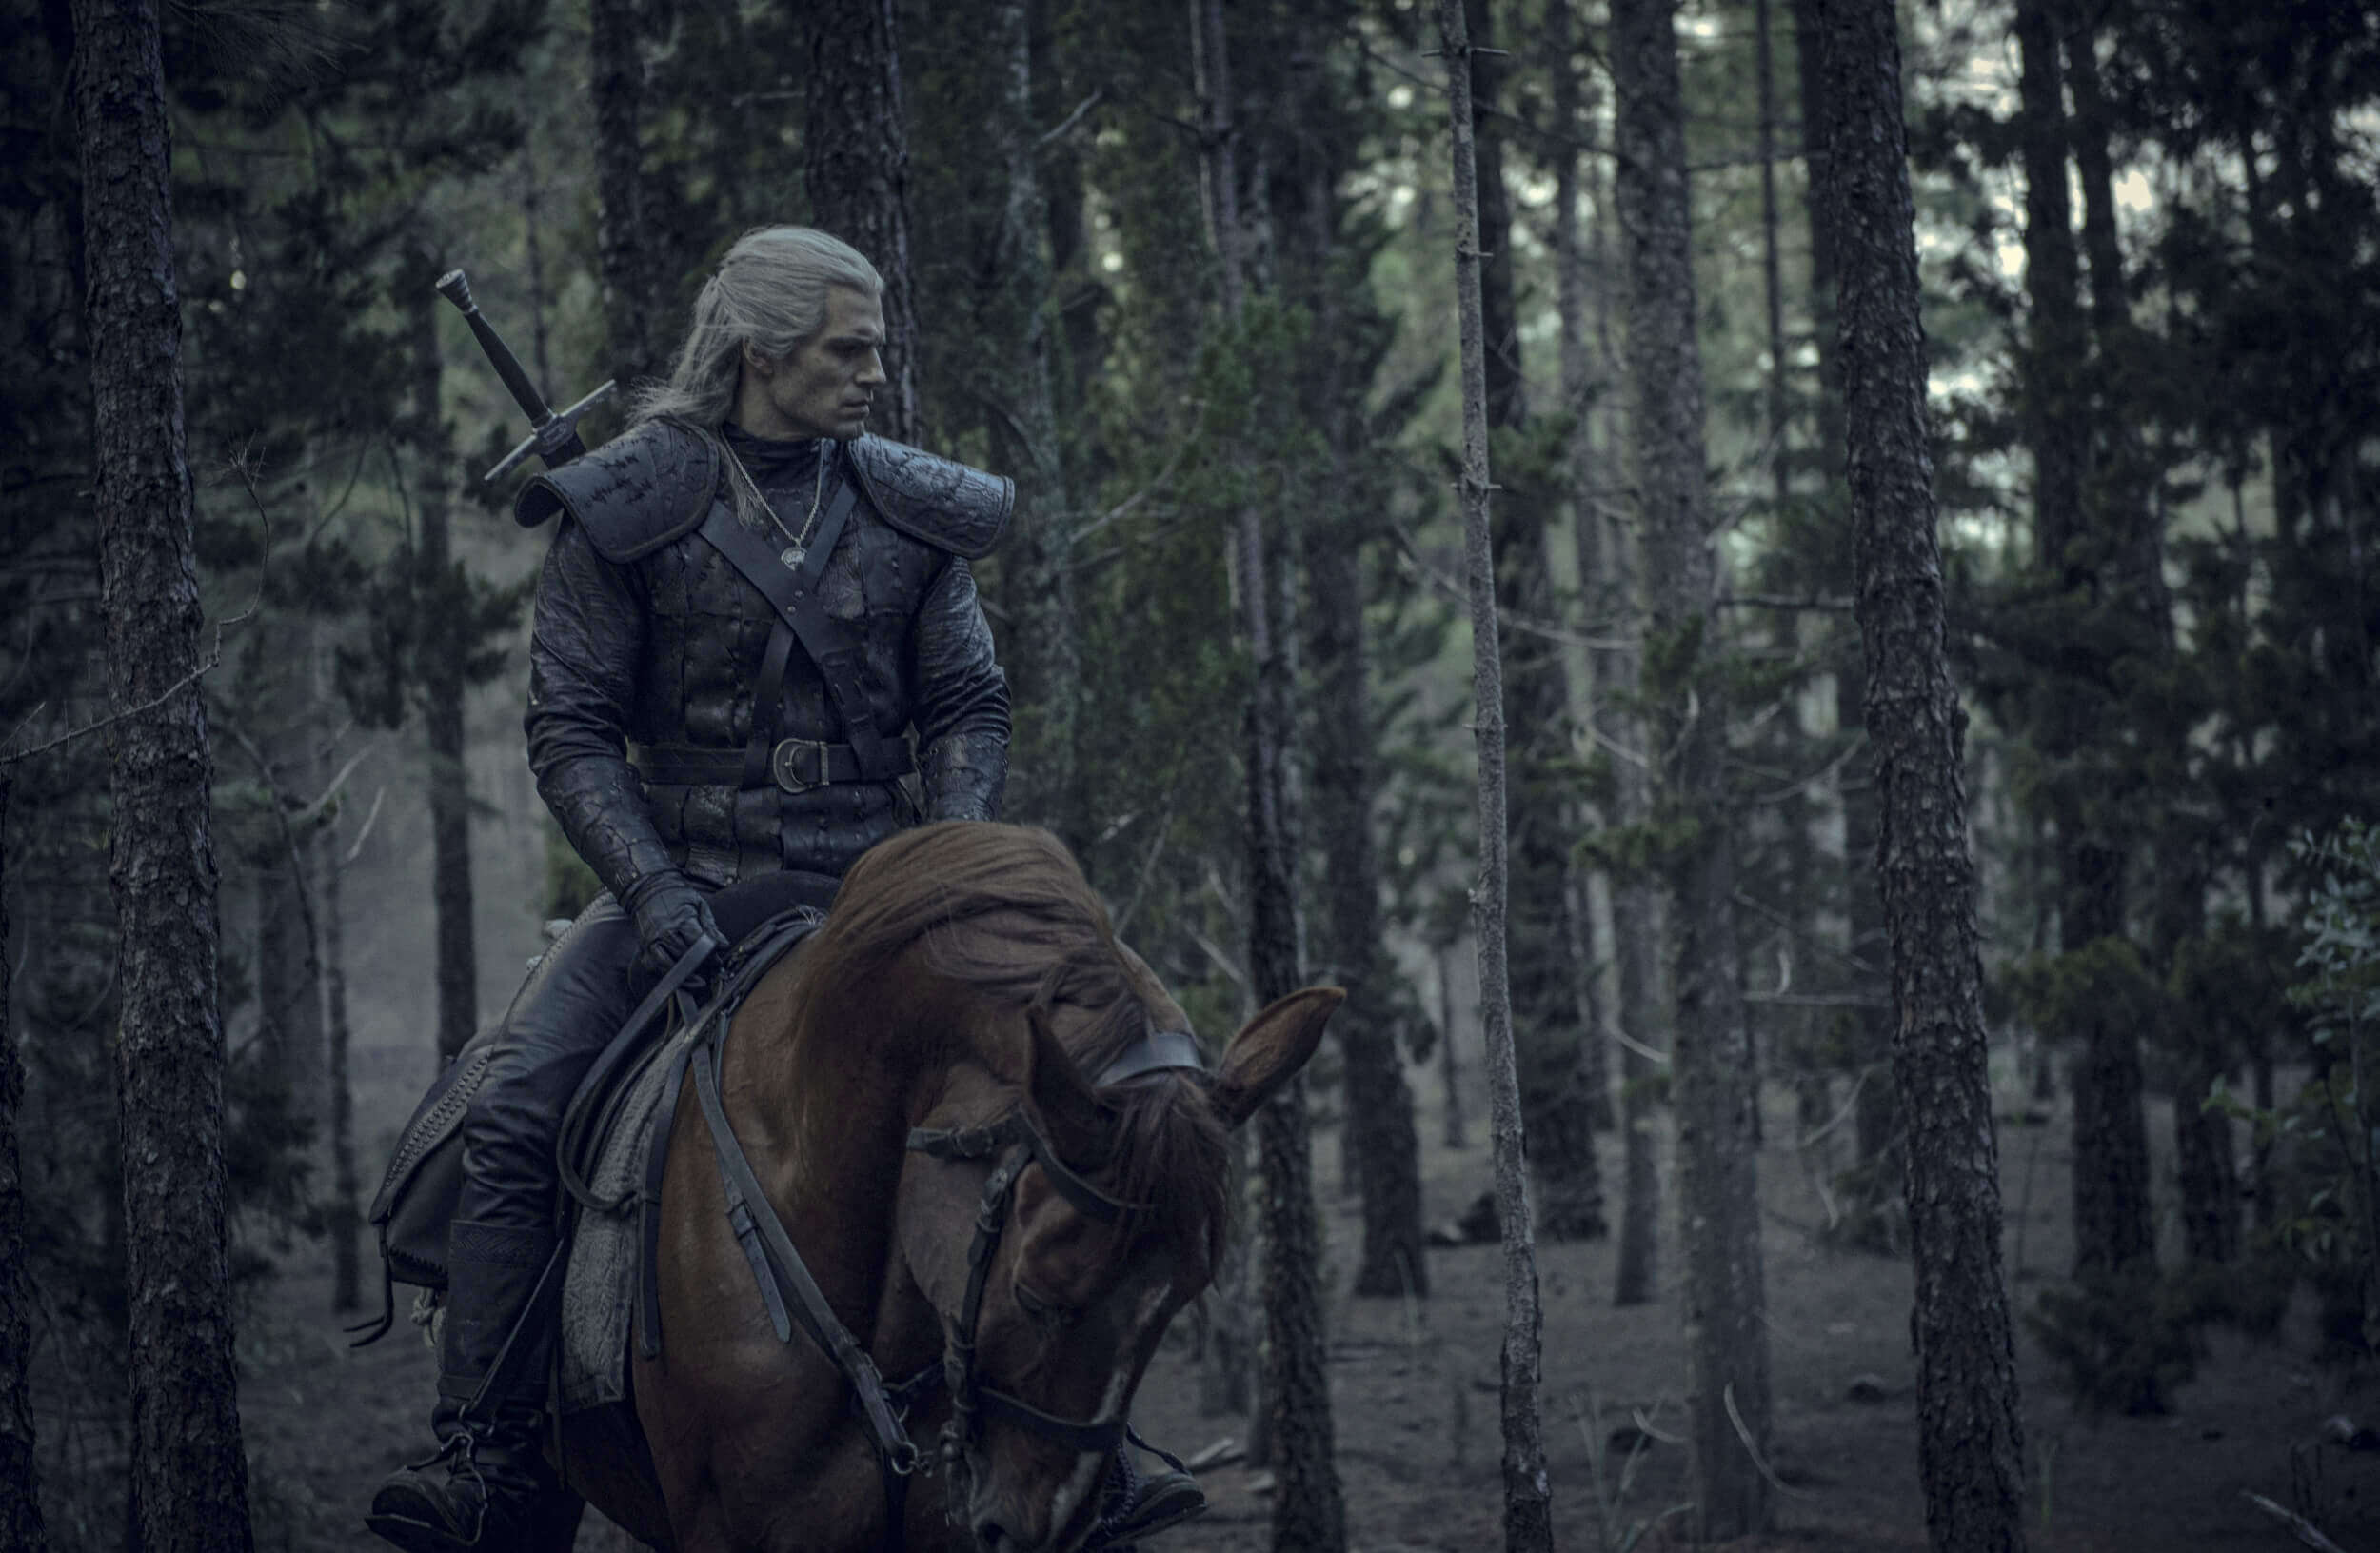 'The Witcher' Book Series Getting Massive New Print Run